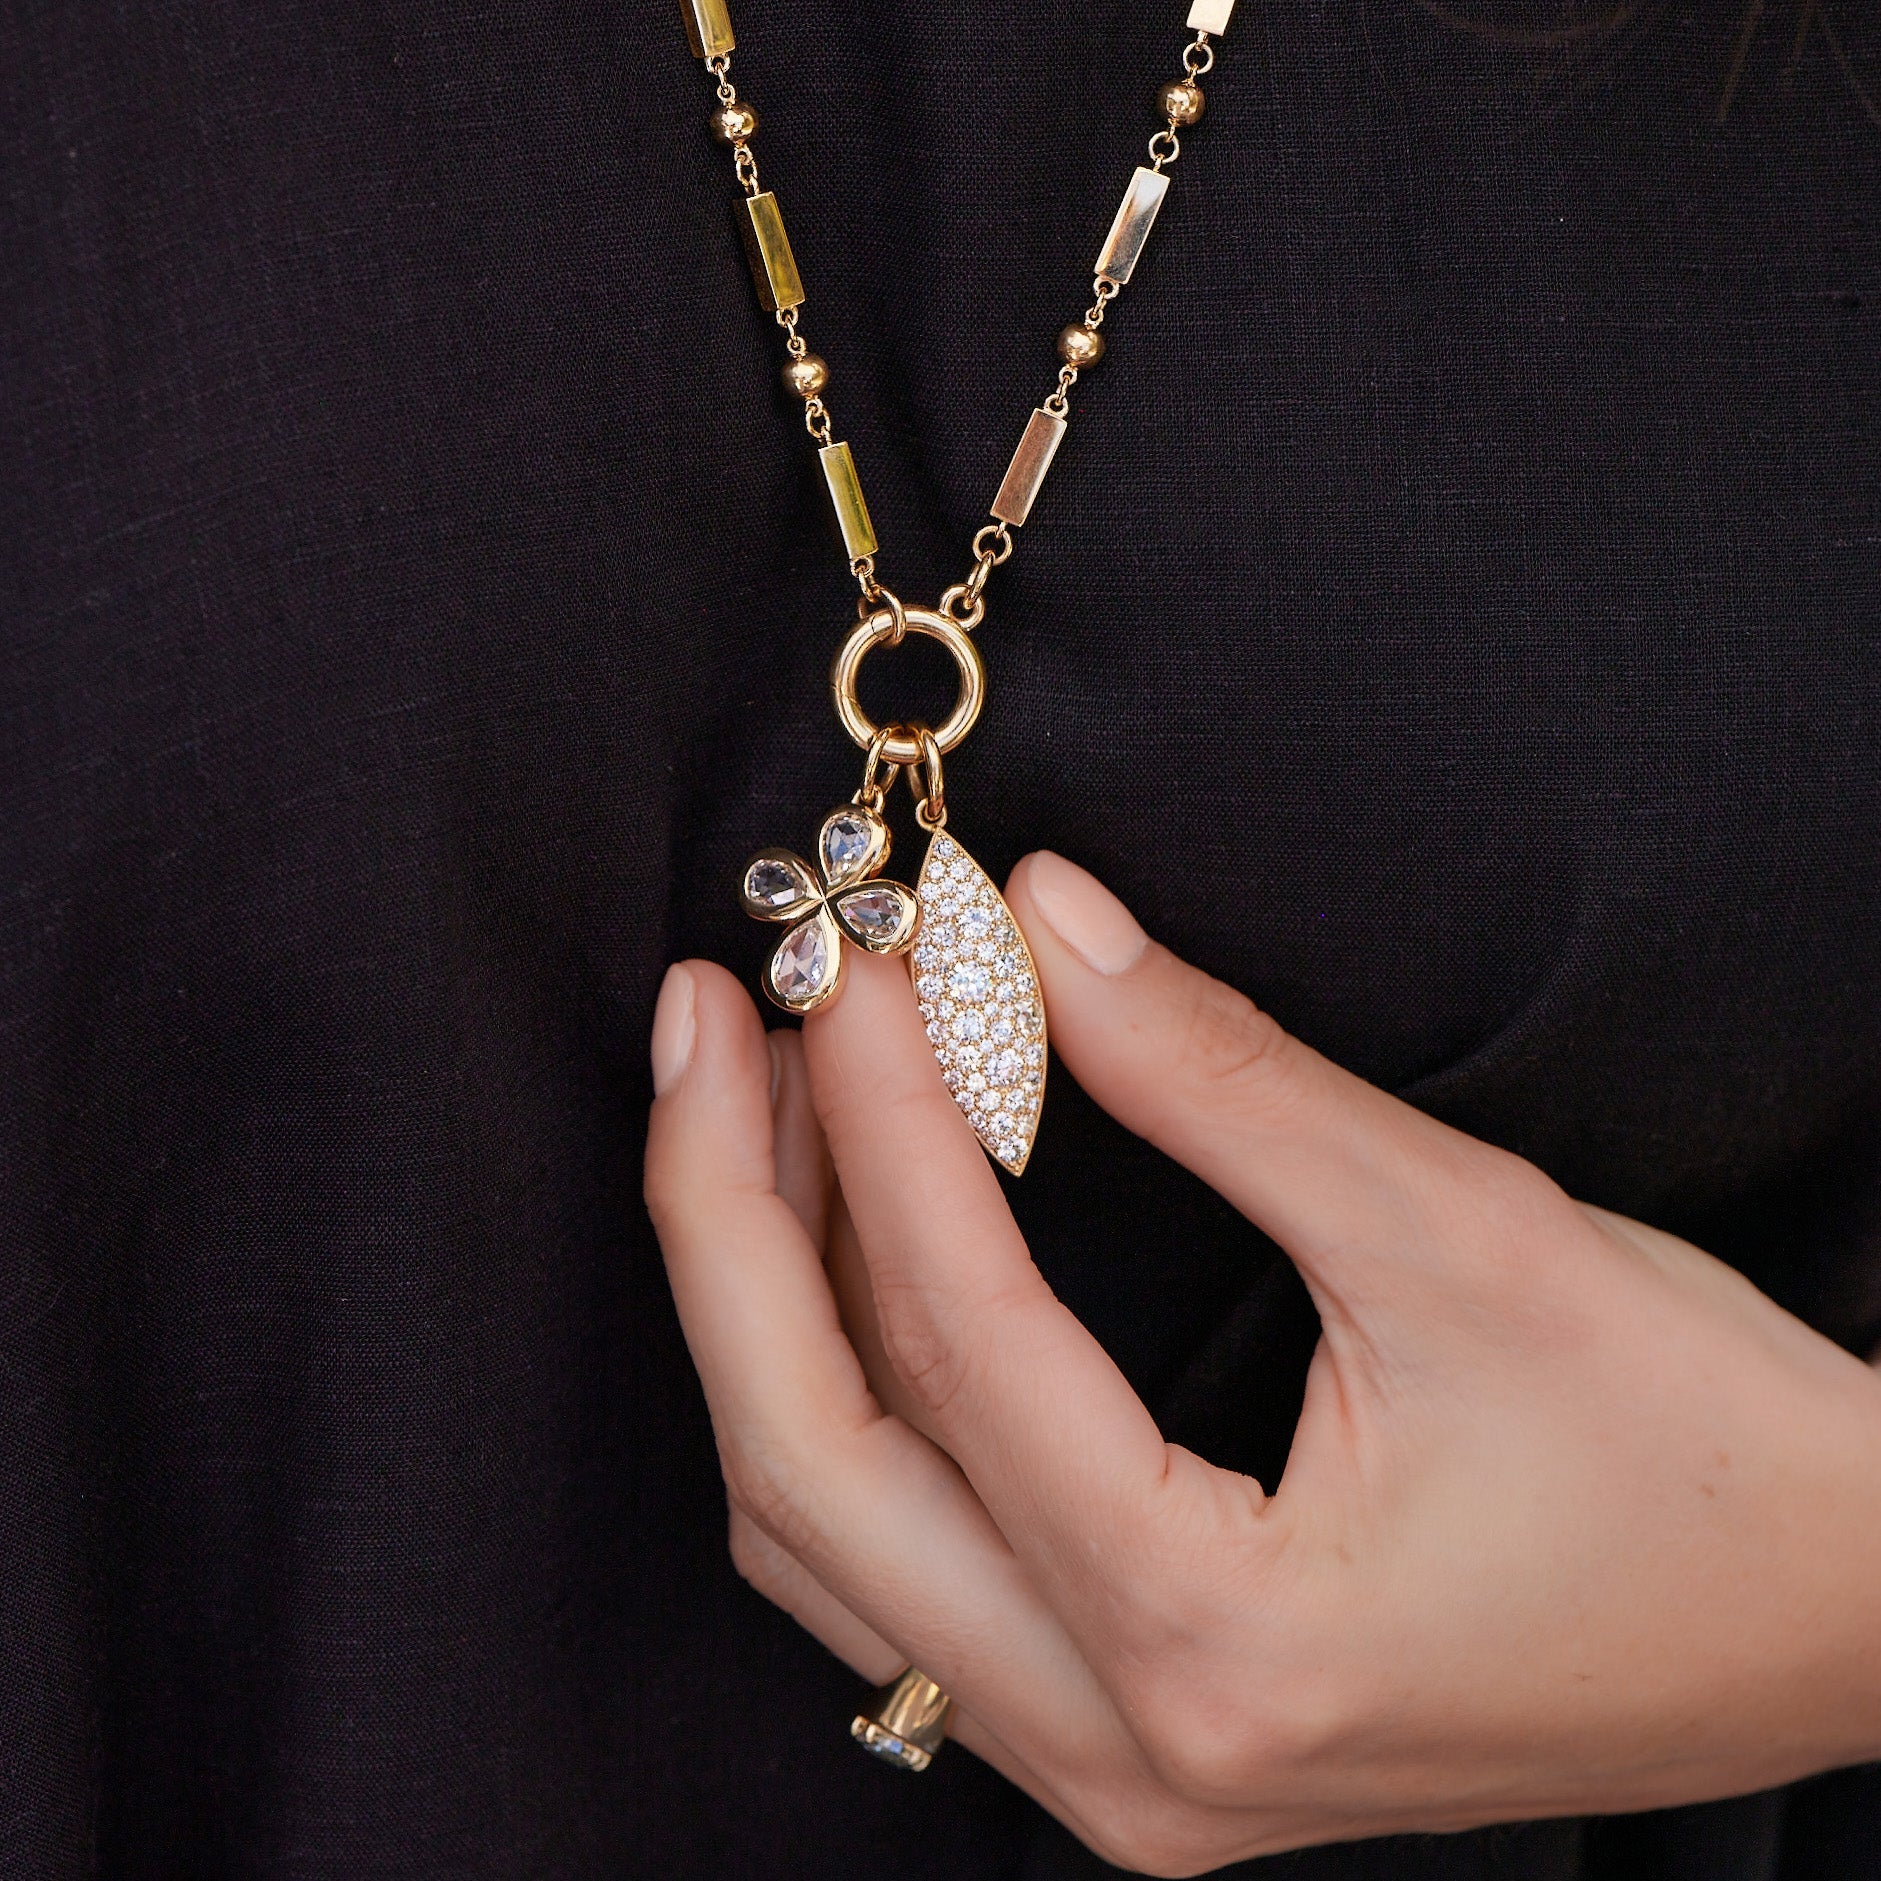 Woman's hand holding a diamond-covered charm hanging from a necklace chain next to a gold and diamond clover-shaped charm, all from the Single Stone collection